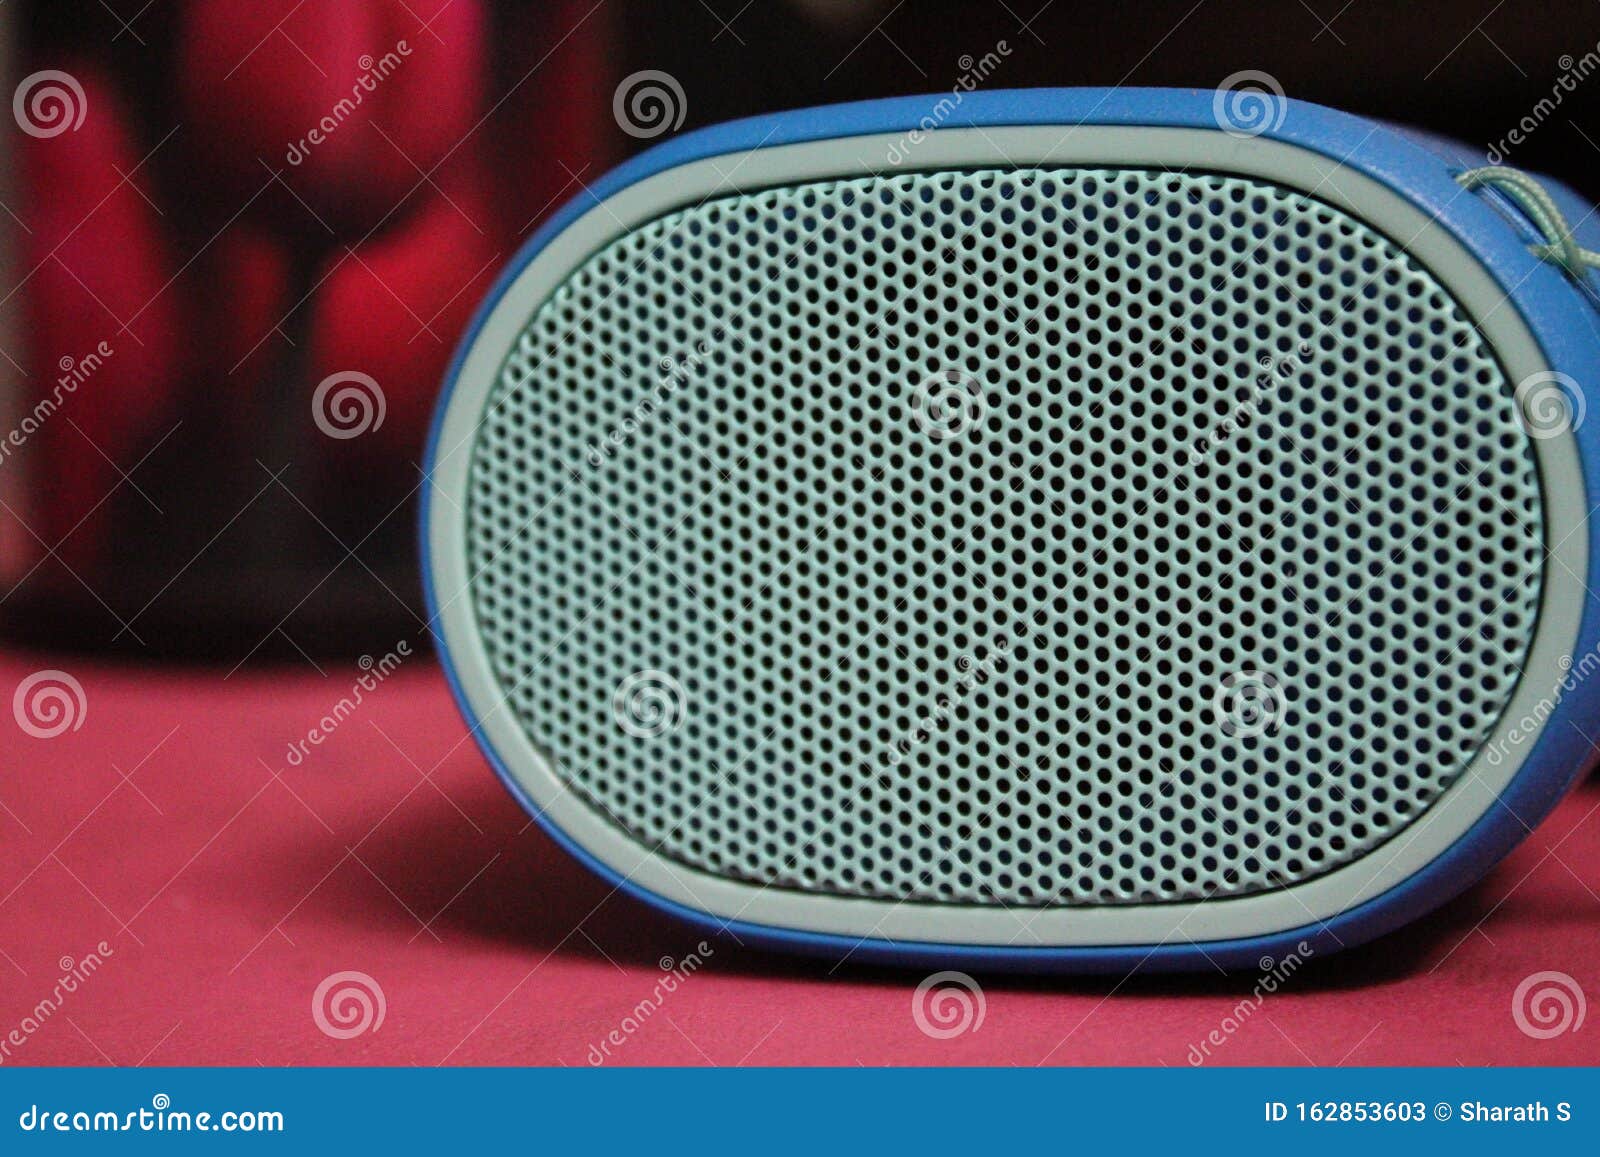 A Bass Boosted Bluetooth Speaker Stock Image Image Of Noise